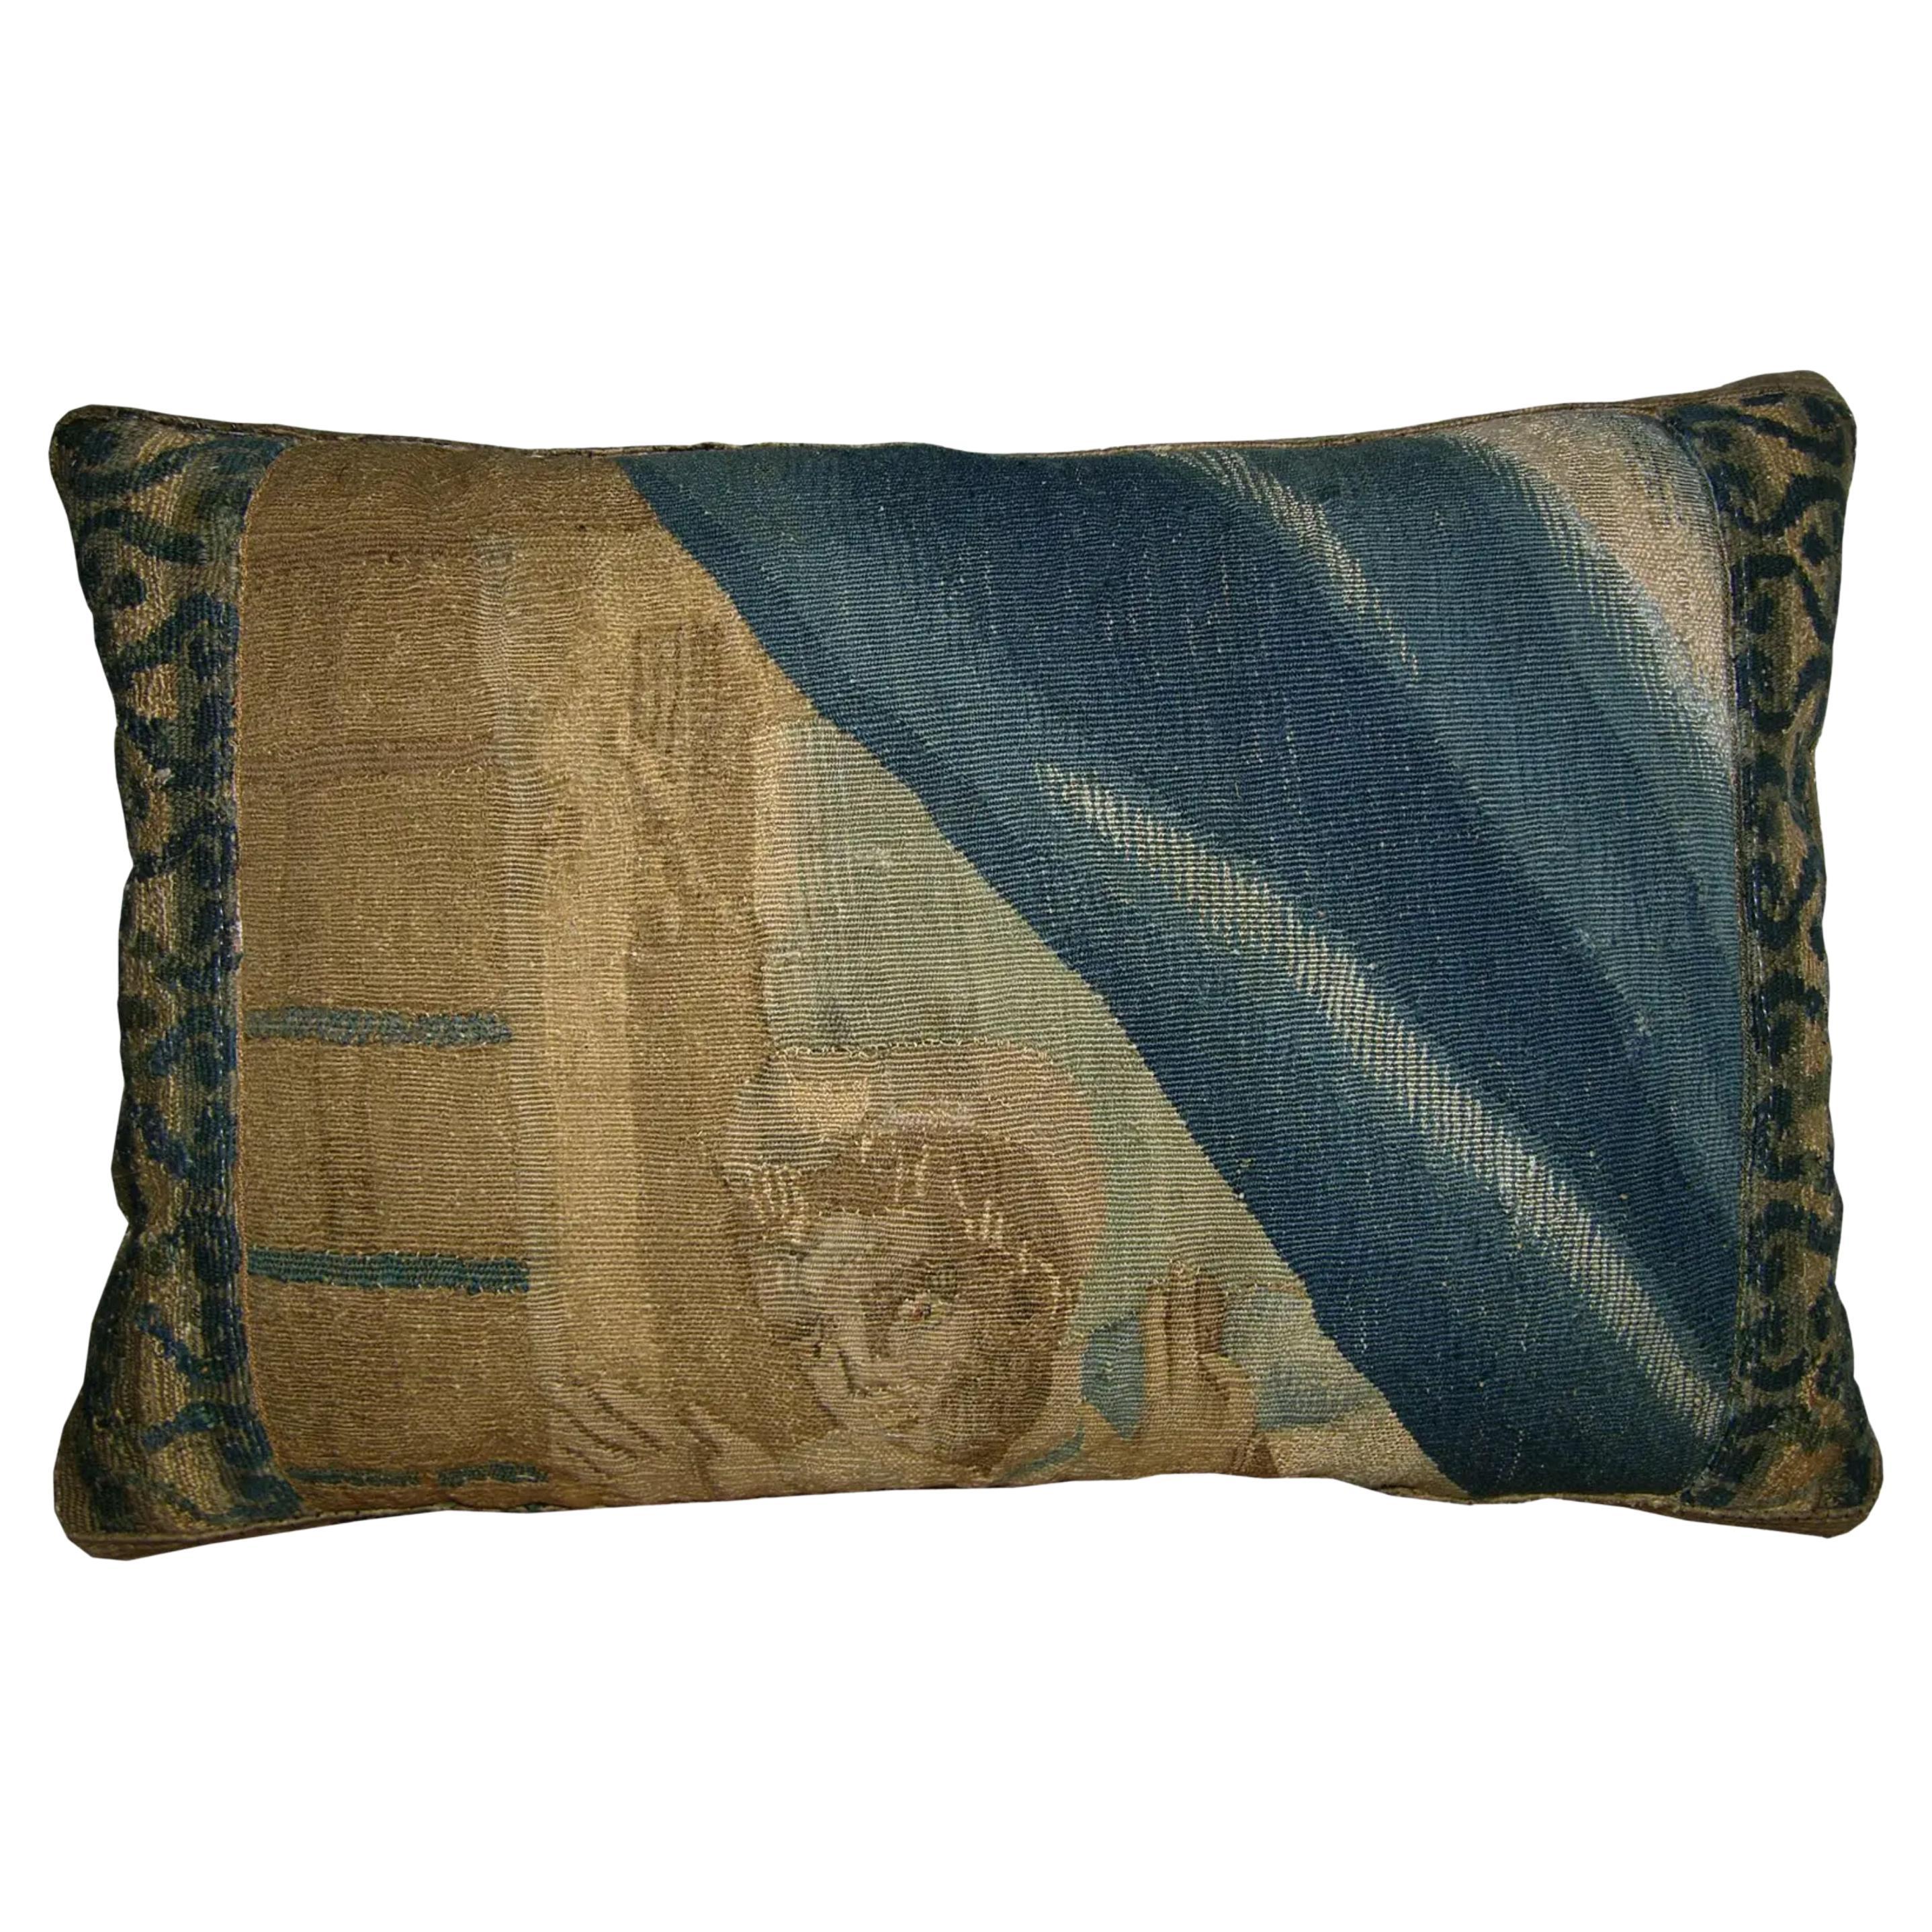 17th Century Antique Brussels Tapestry Pillow - 18 X 12 For Sale